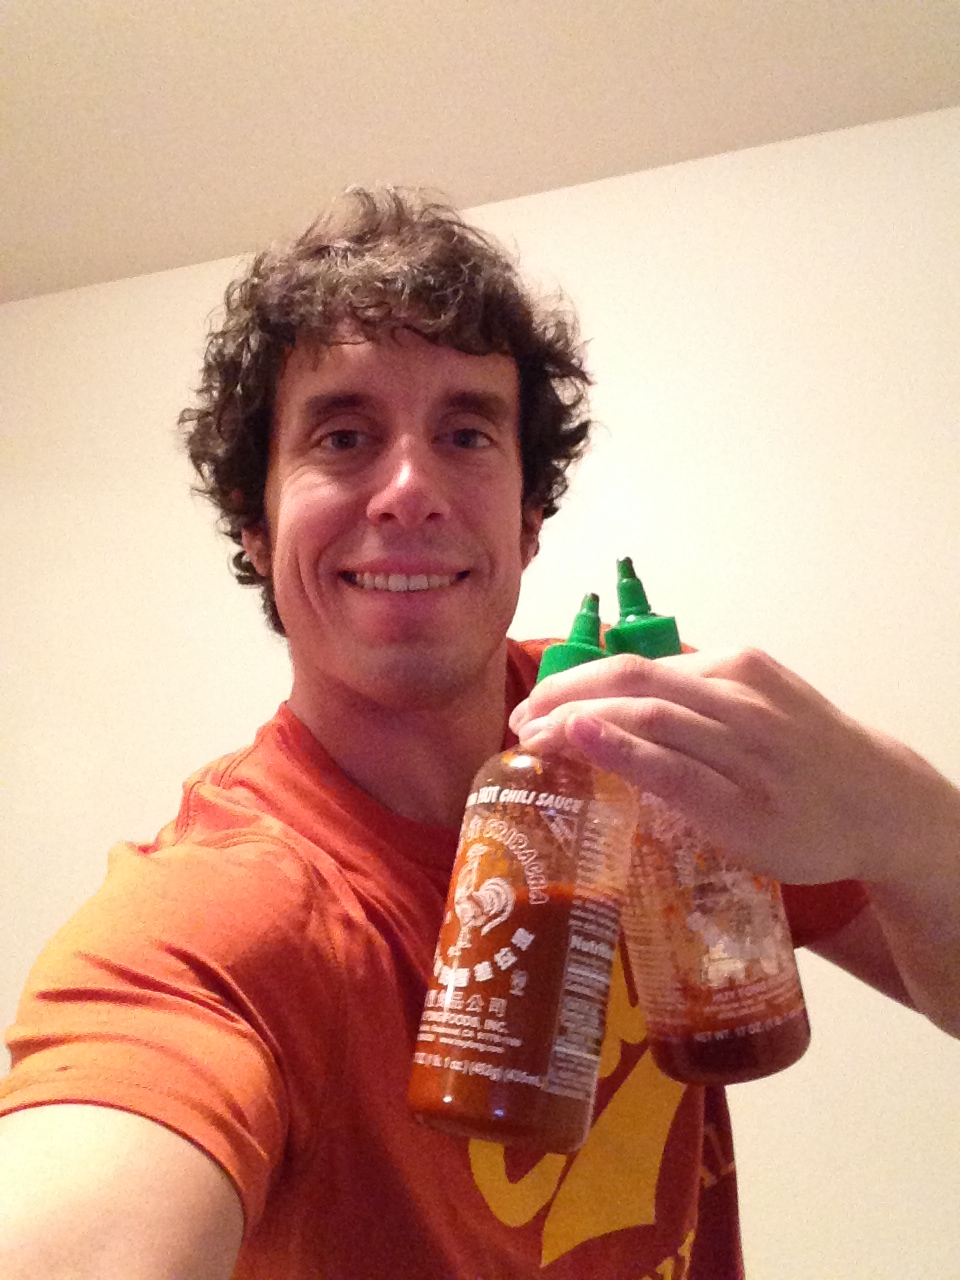 Myself with my one and only condiment, Sriracha